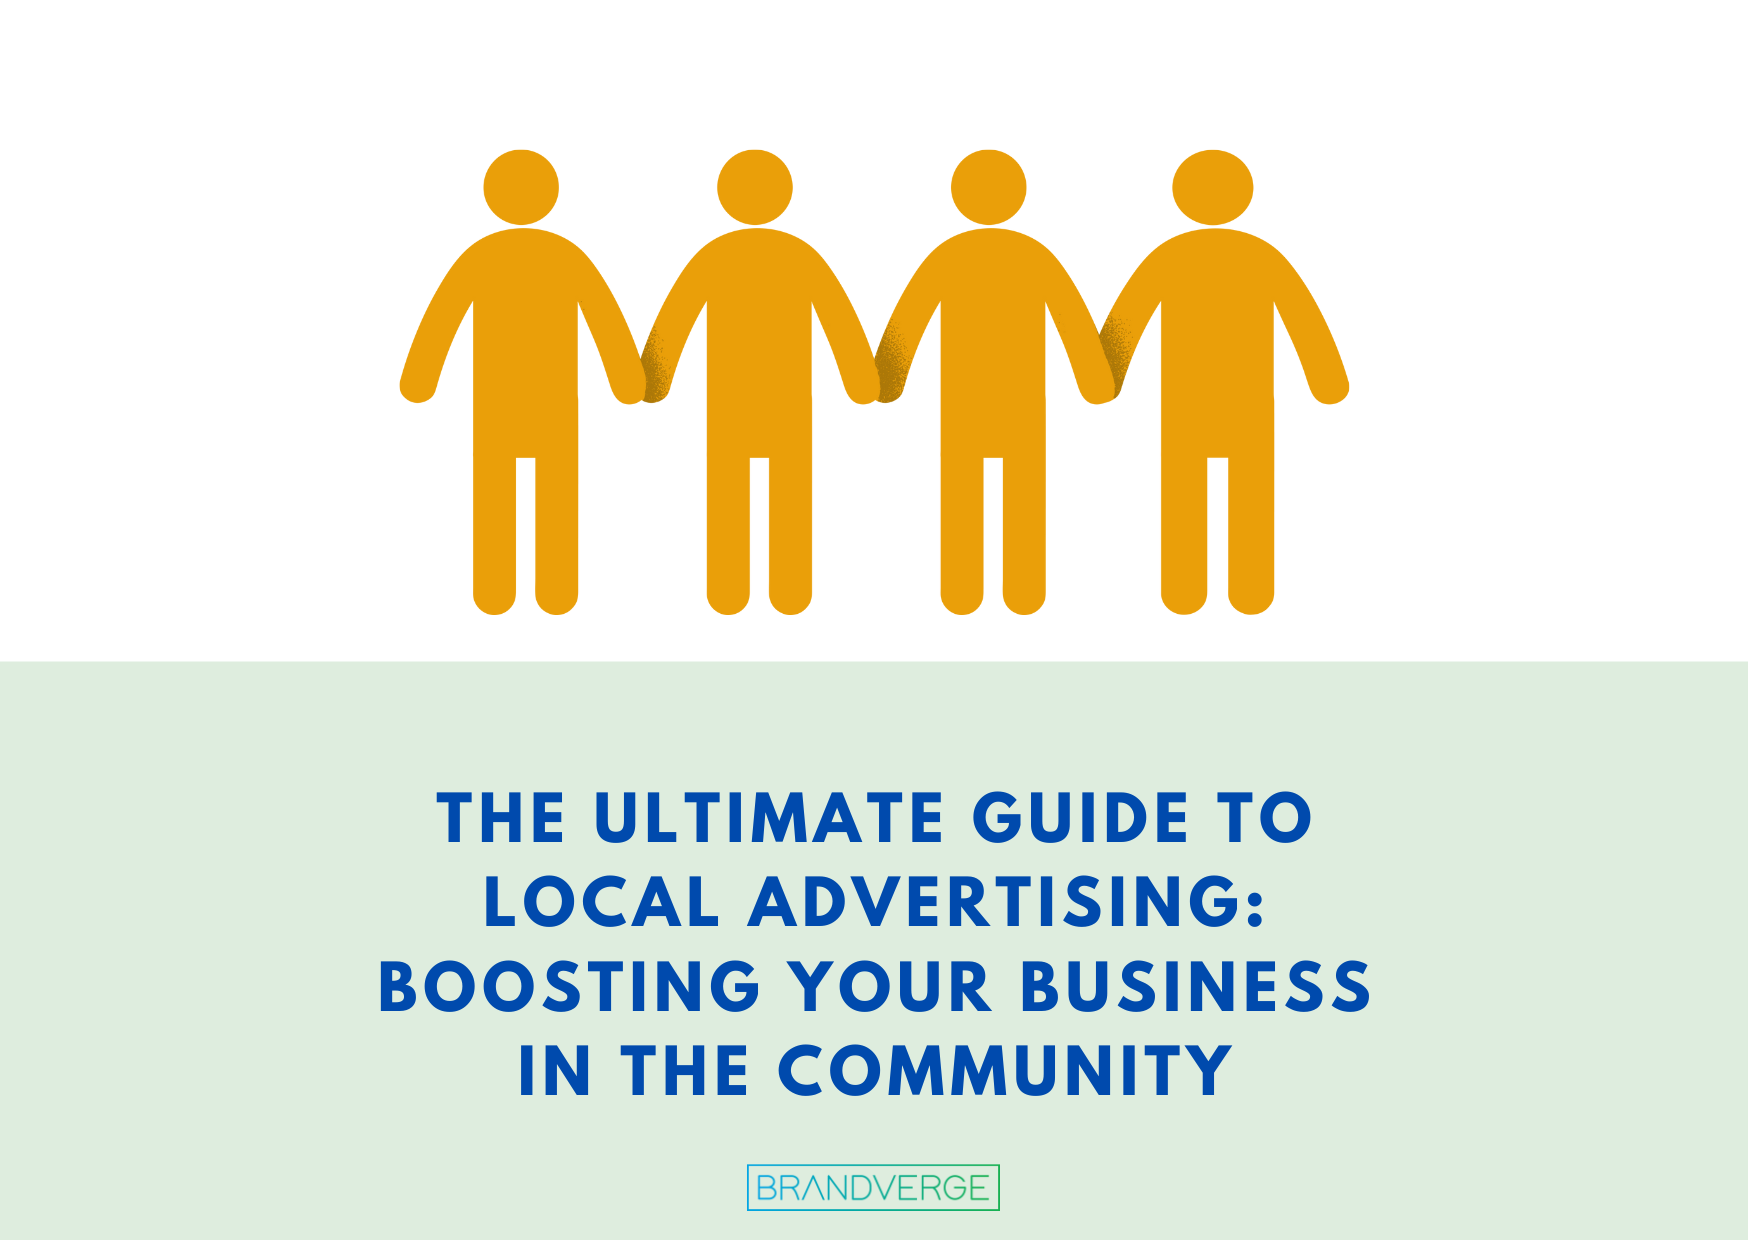 “The Ultimate Guide to Local Advertising: Boosting Your Business in the Community”